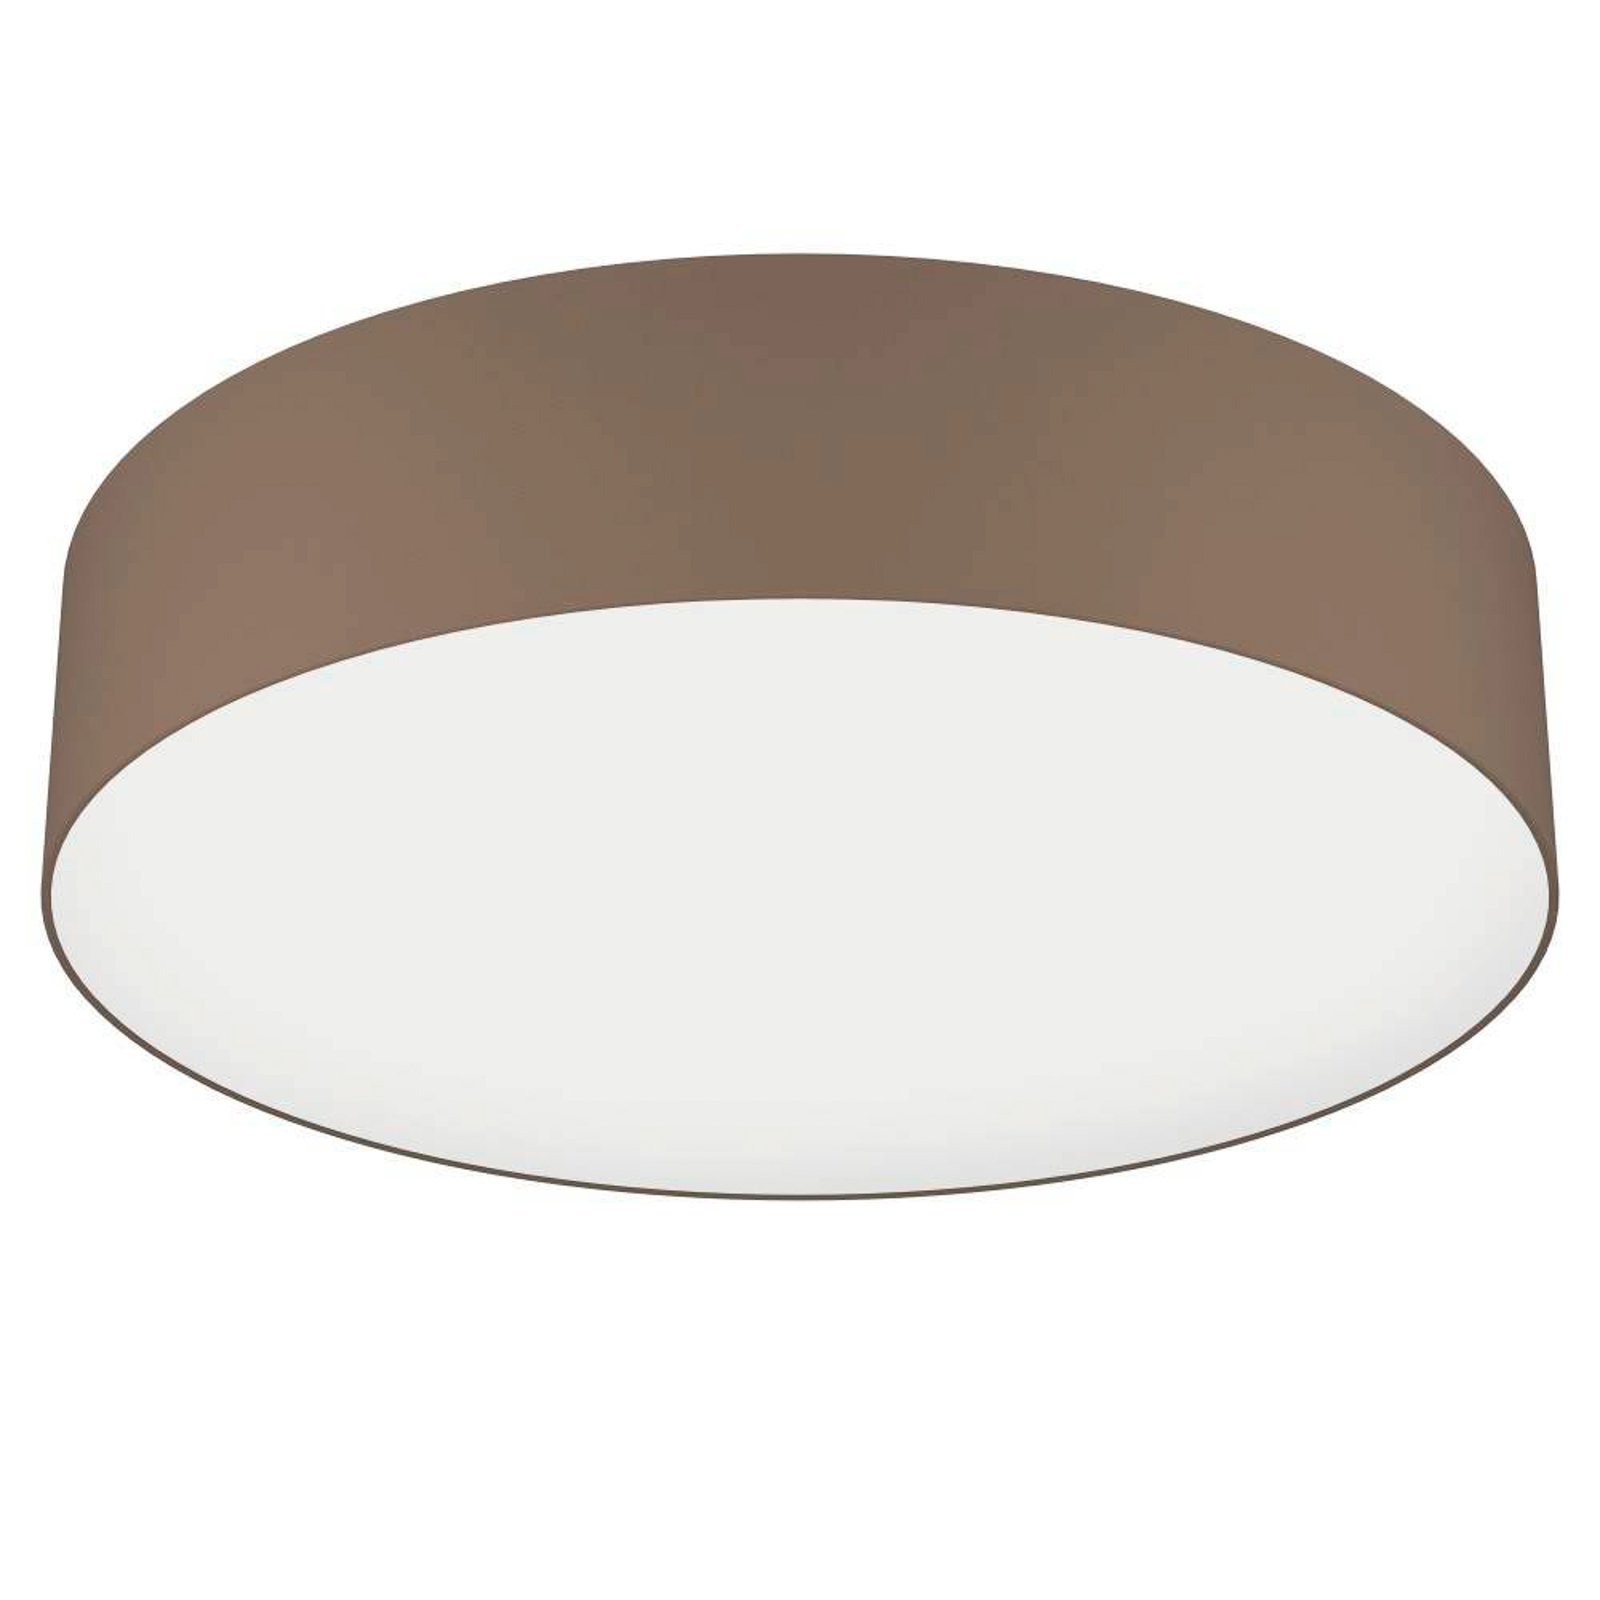 EGLO connect Romao-Z LED-taklampa, Ø57cm, taupe